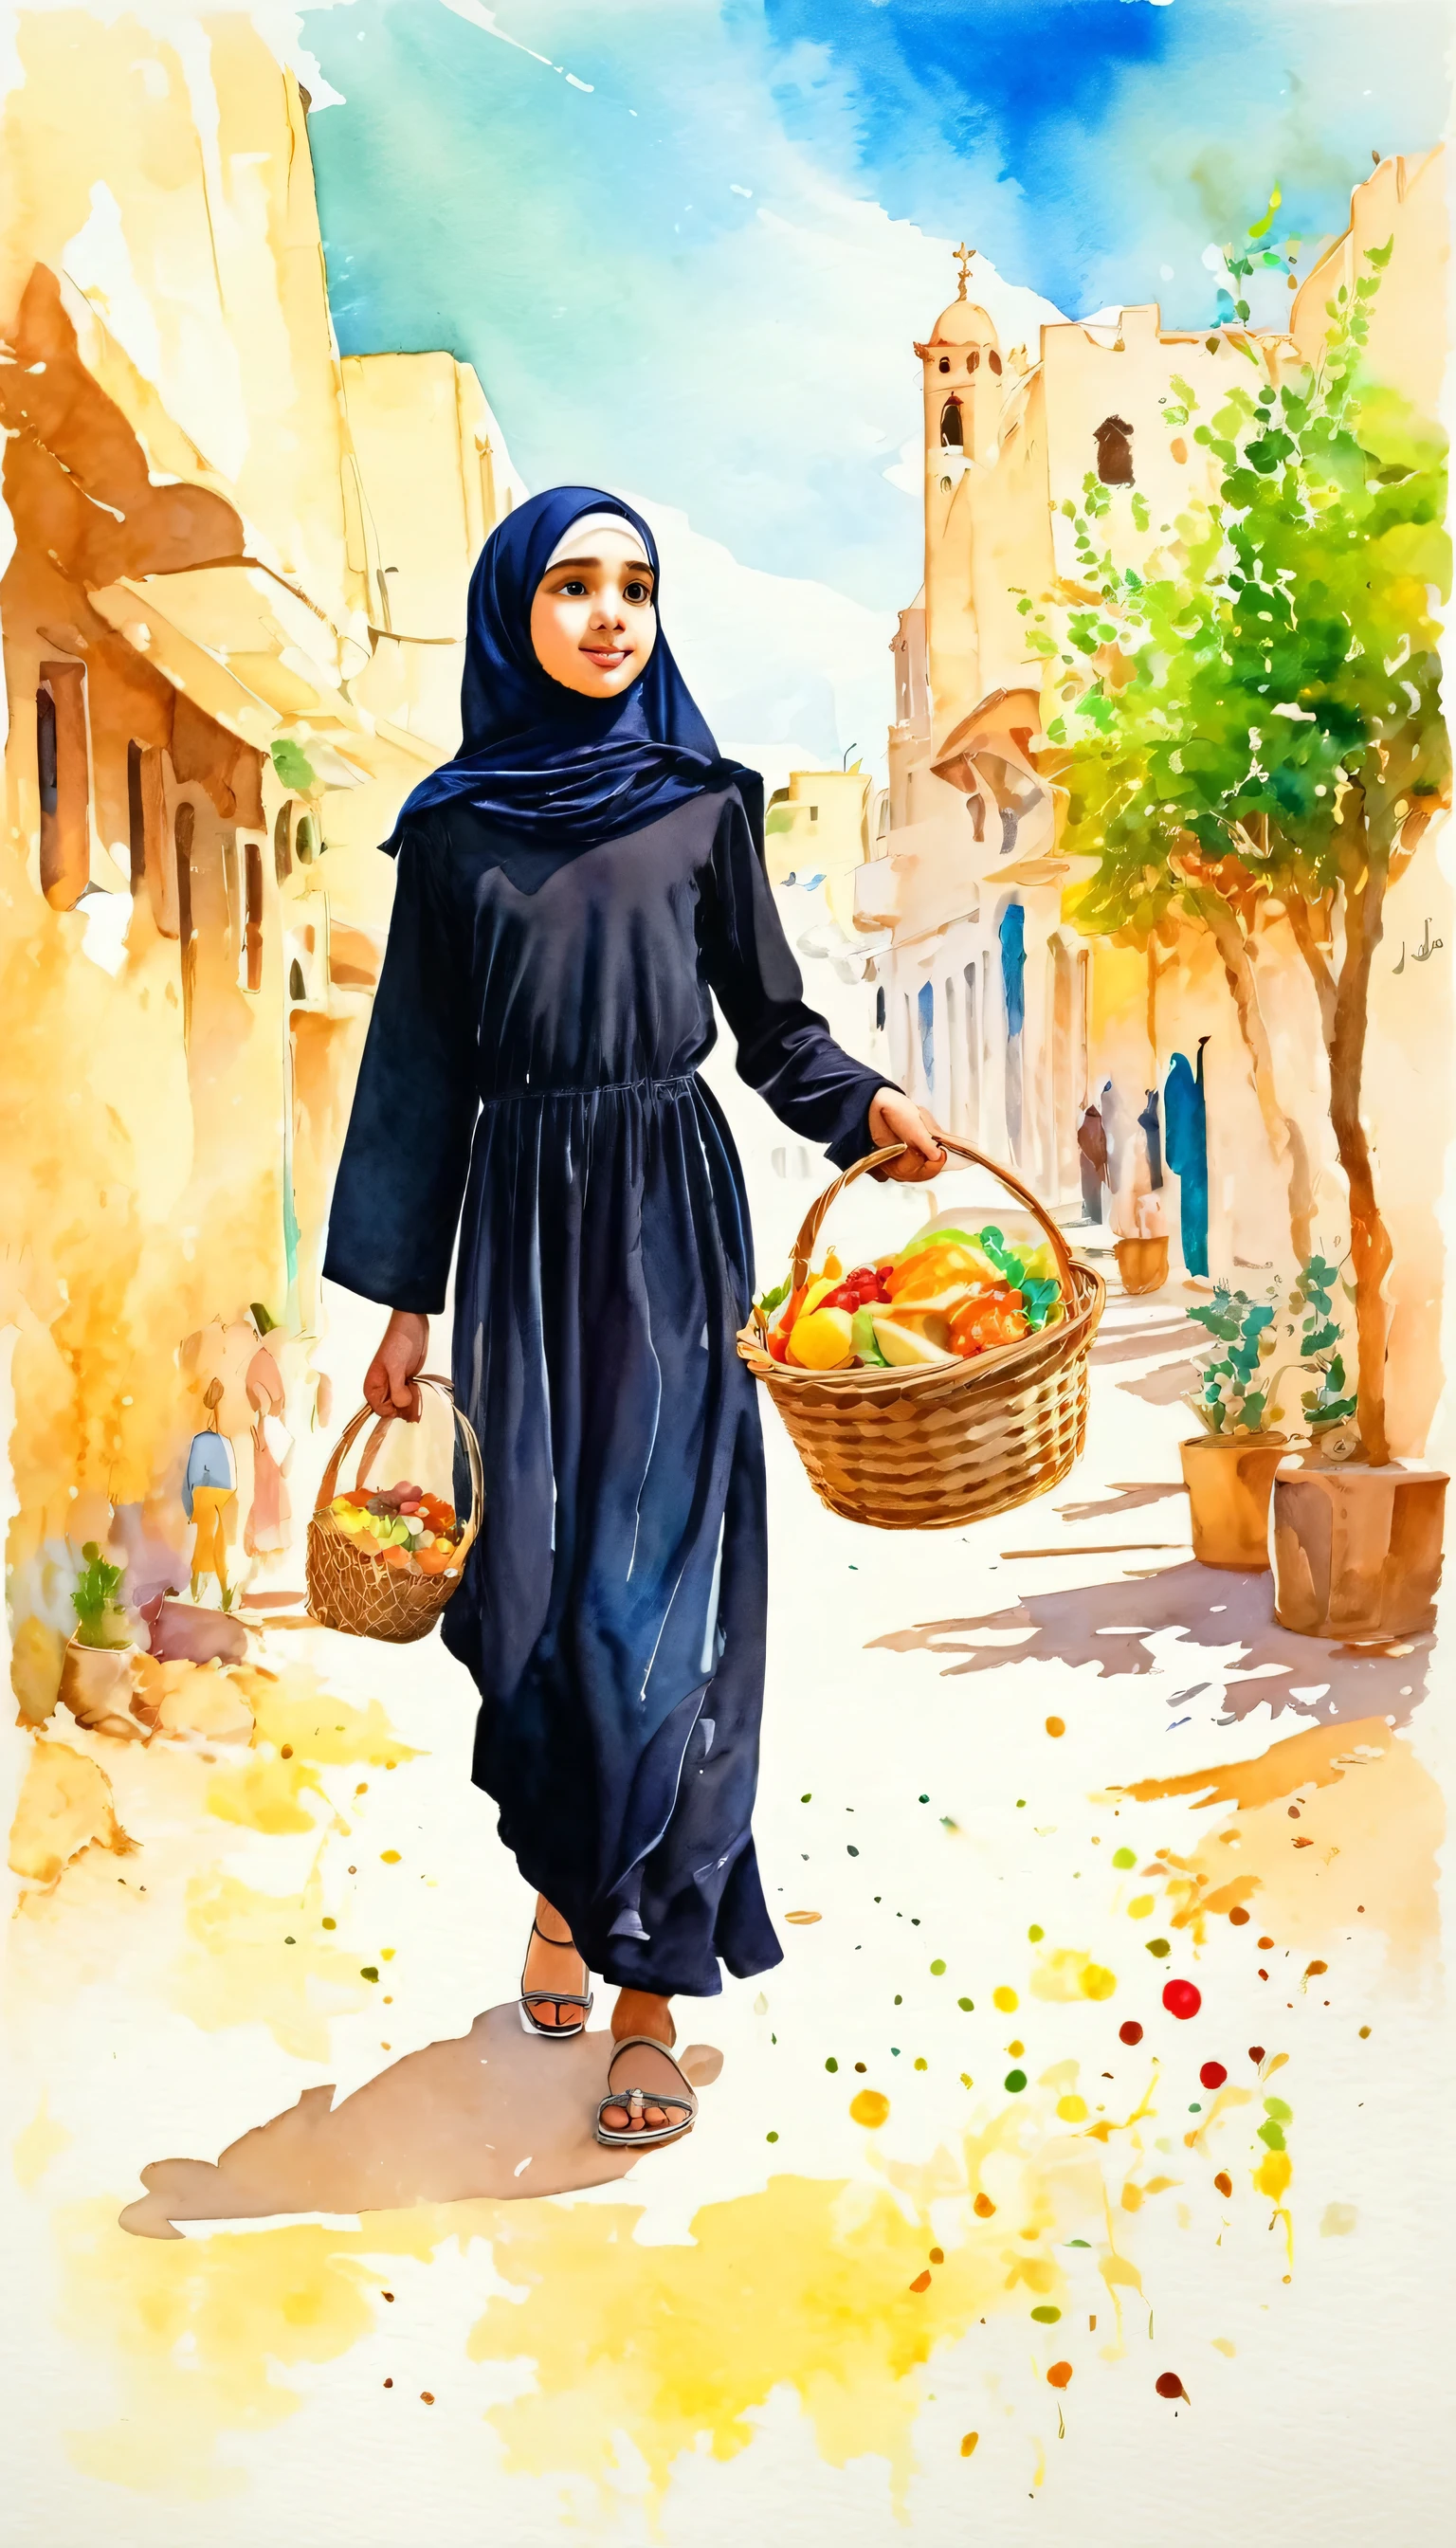 6years old Arab girl wearing a black dress and hijab walking outdoors, crowd, religious festivity, holding, holding basket, food, offering food, looking_at_viewer, modern art, painting, drawing, watercolor, psychedelic colors